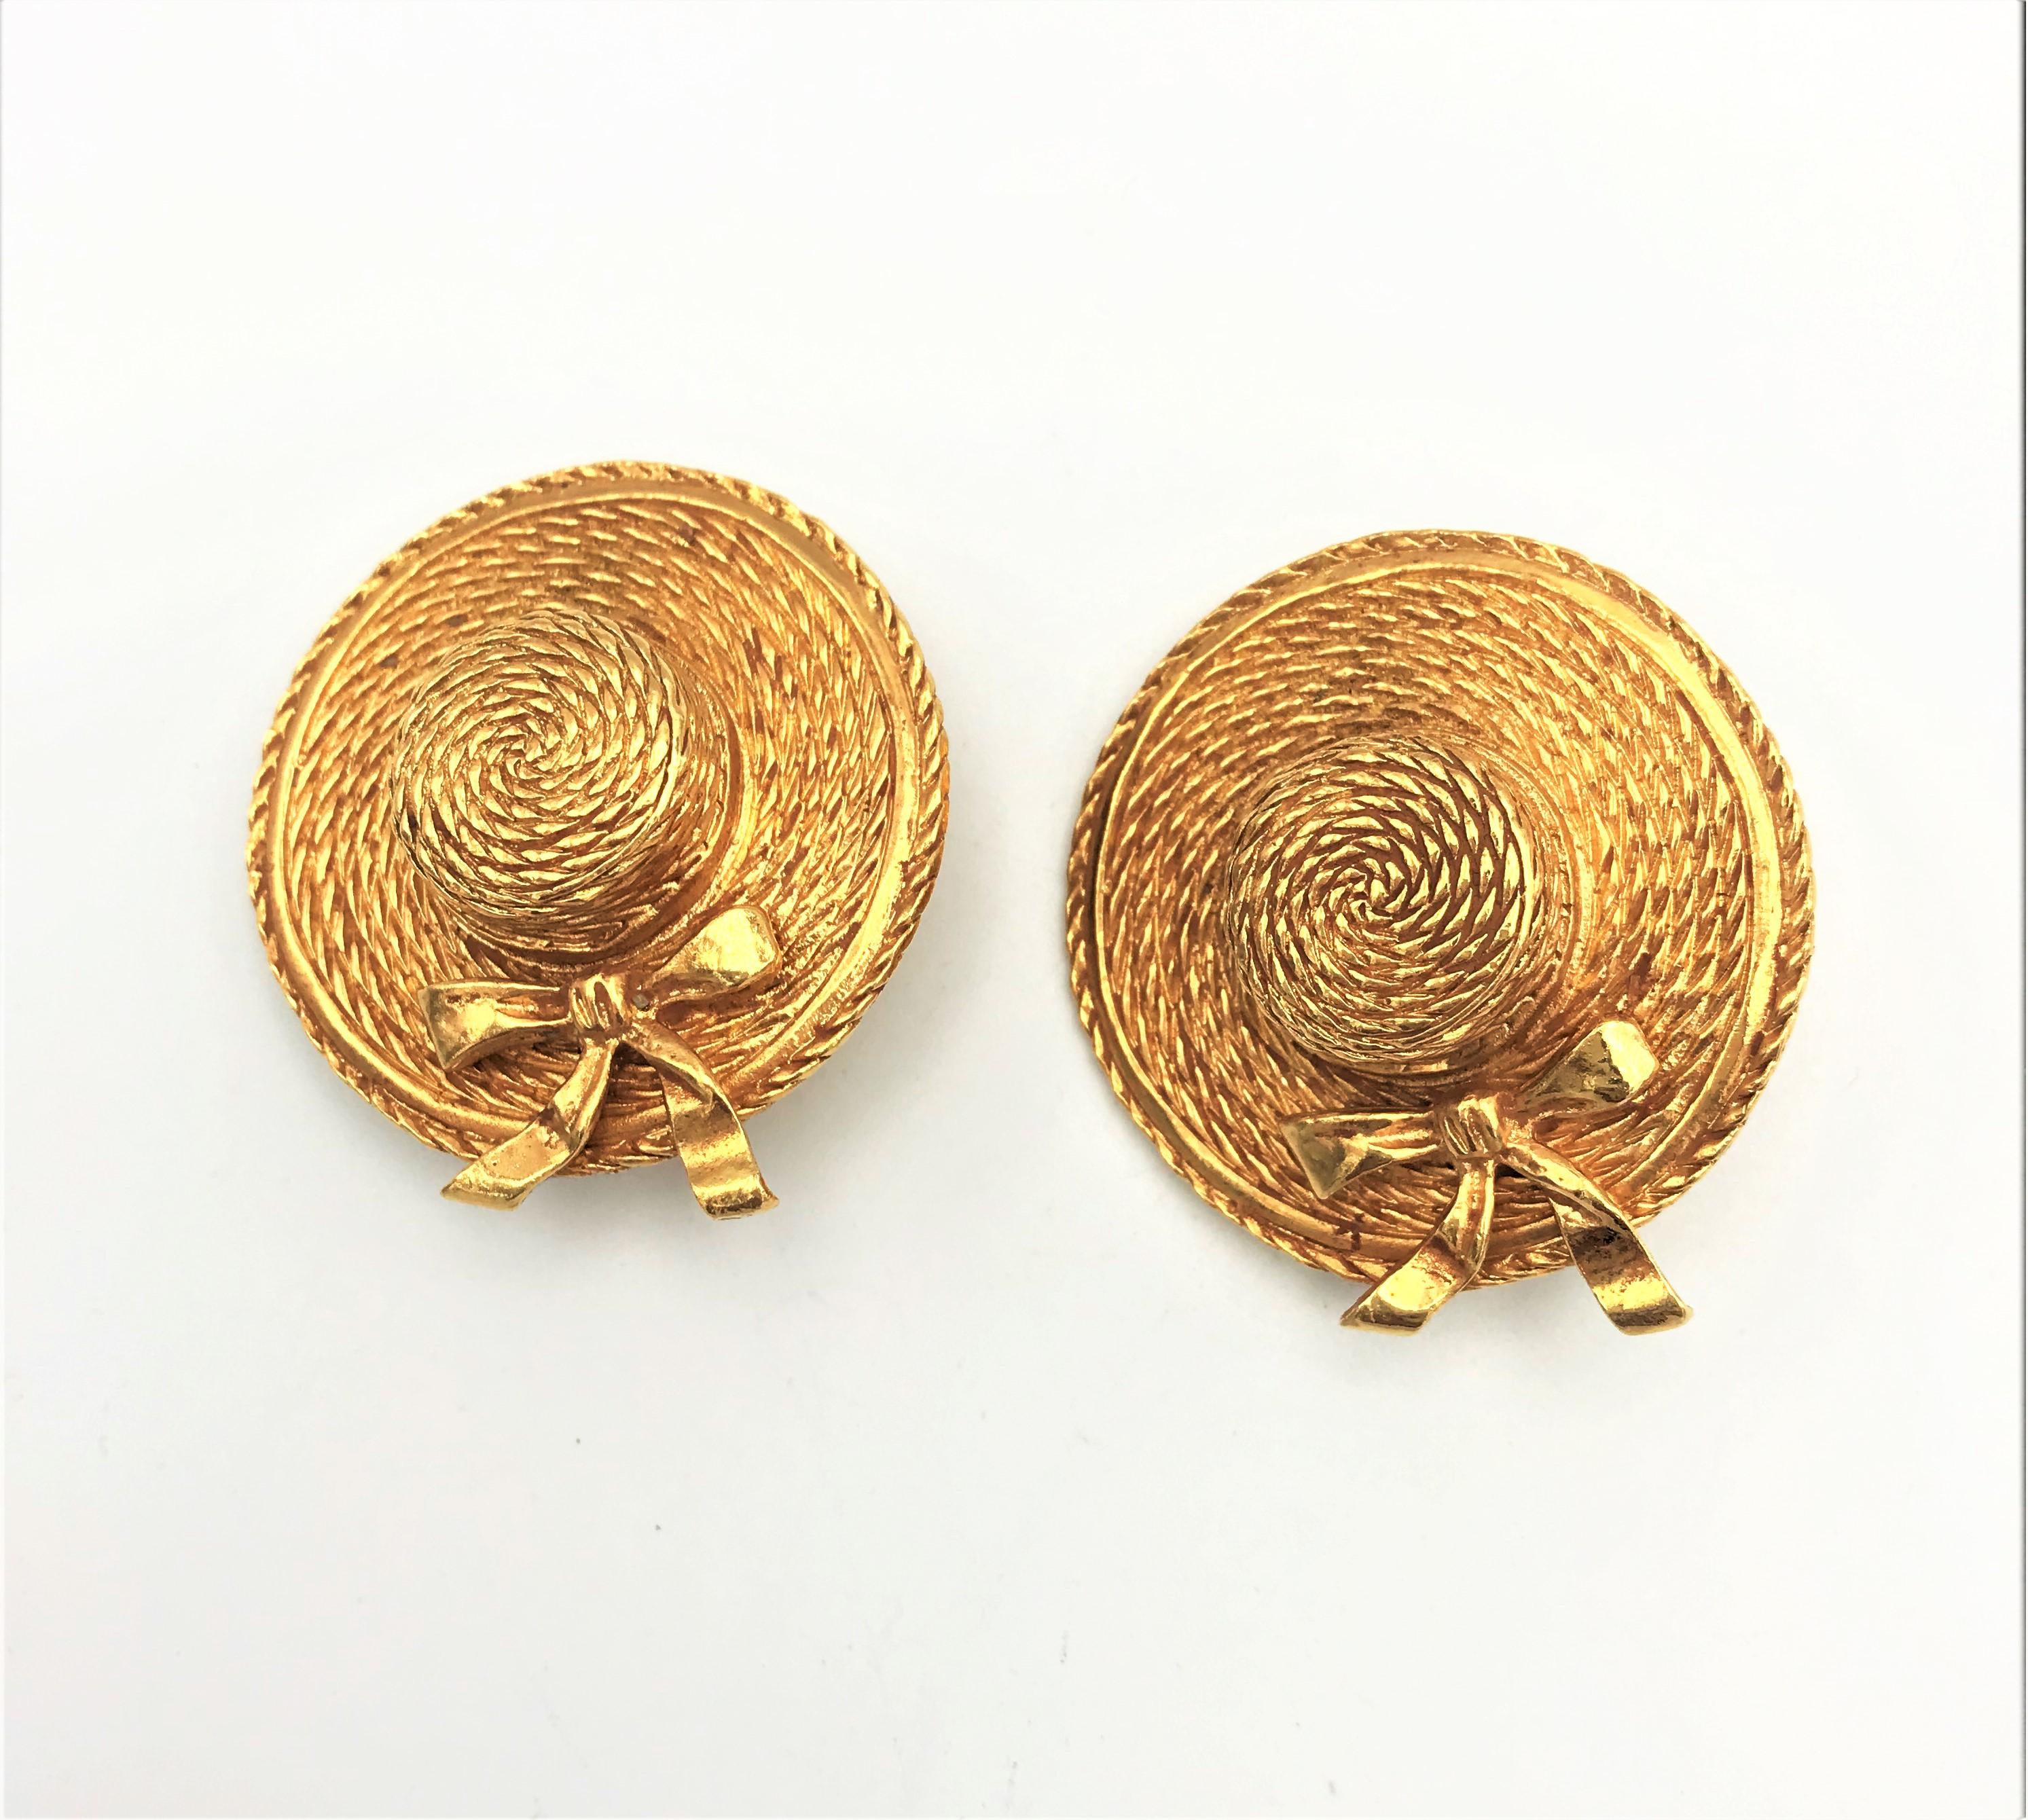 Chanel Clip-on Earrings in the shape of a hat, signed 1970/80s gold plated  For Sale 6